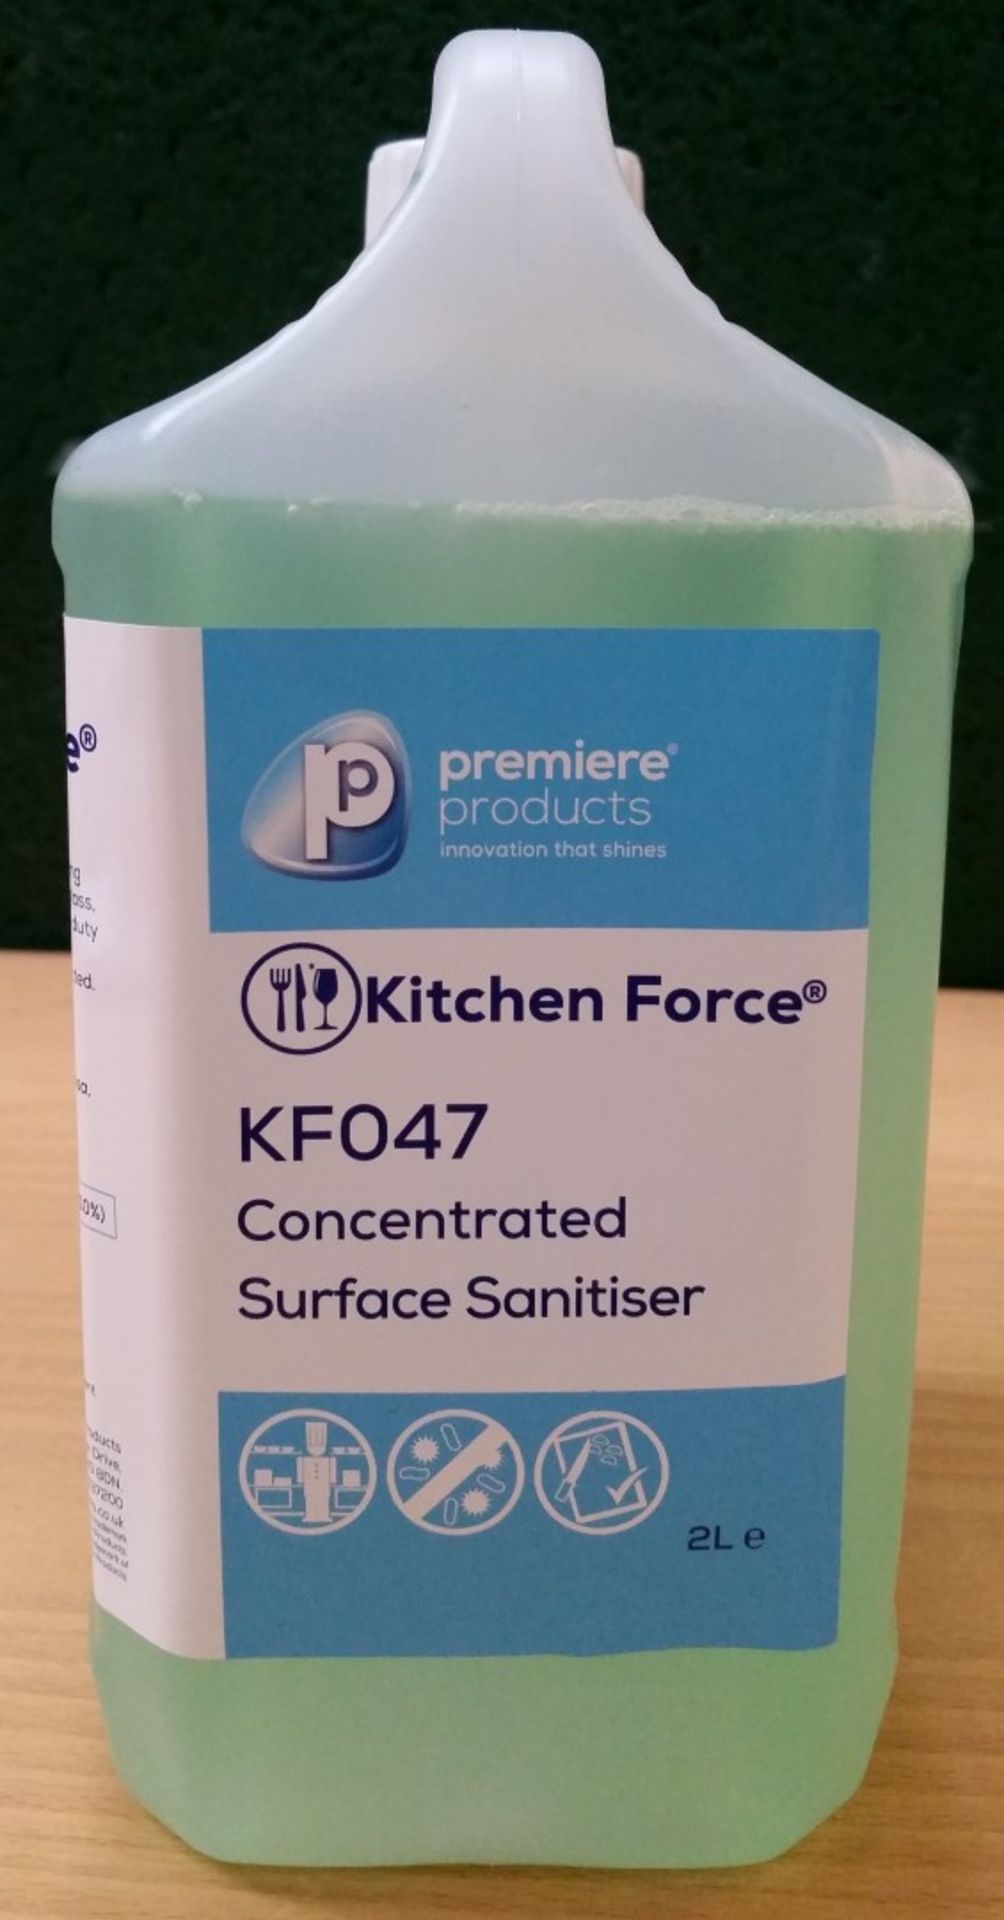 4 x Premiere Kitchen Force 2 Litre Concentrated Surface Sanitiser - Suitable For Foaming - Image 4 of 4